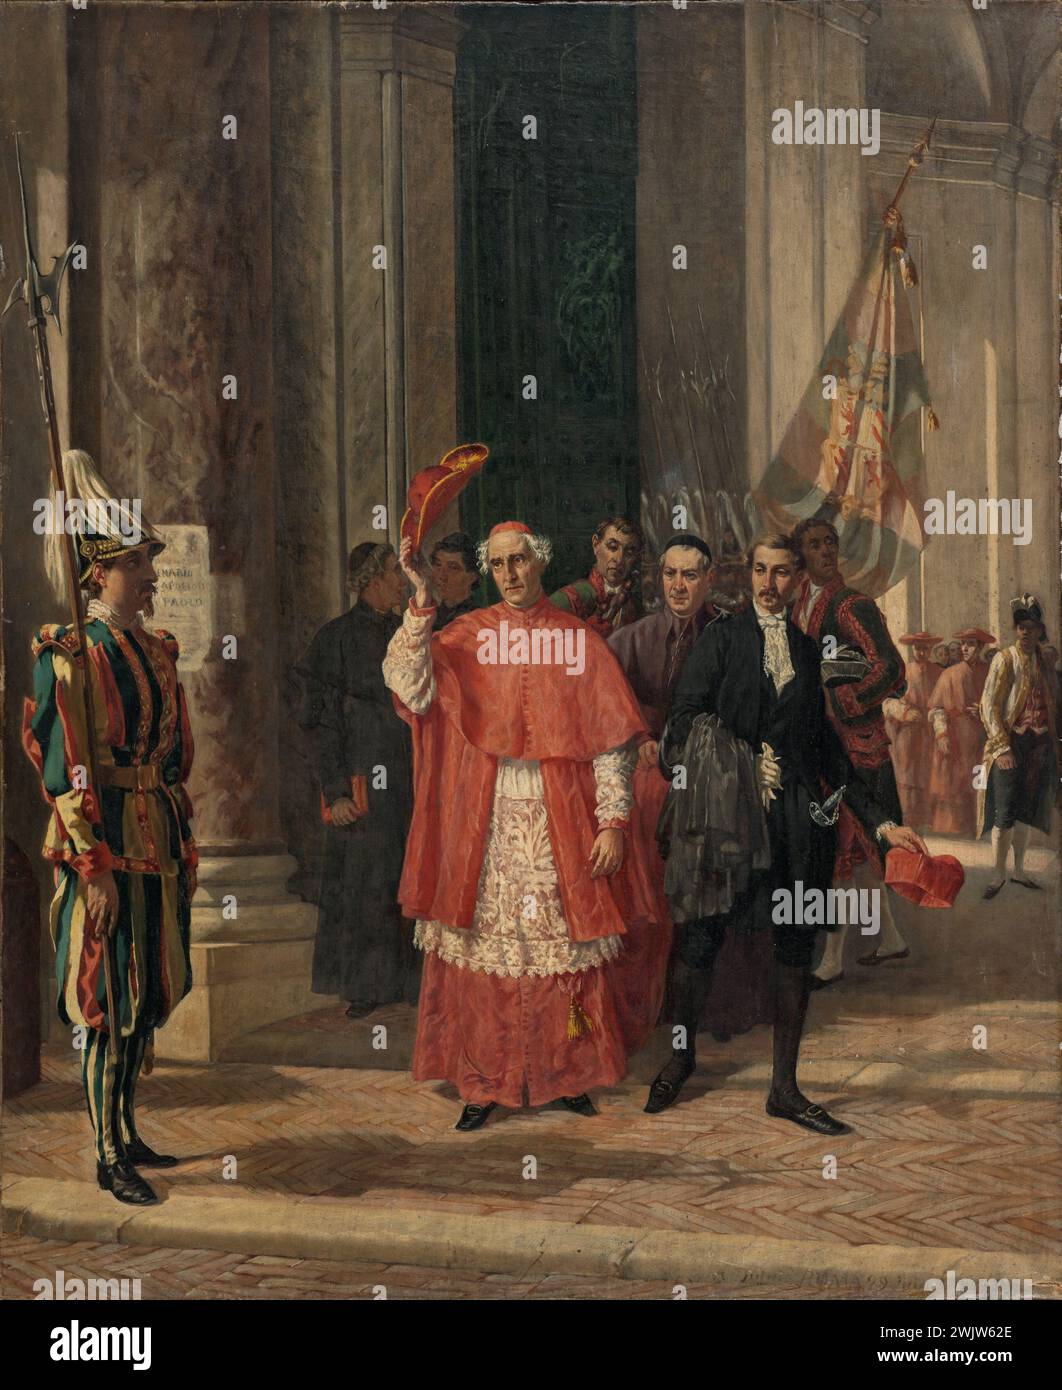 Auguste Dutuit (1812-1902). Cardinals out of the Vatican. Oil on canvas. 1867. Museum of Fine Arts of the City of Paris, Petit Palais. Cardinal, Catholic, Chretian Christian, Ecclesiastics, Swiss guard, Vatican, 19th 19th 19th 19th 19th 19th century, Oil on canvas Stock Photo